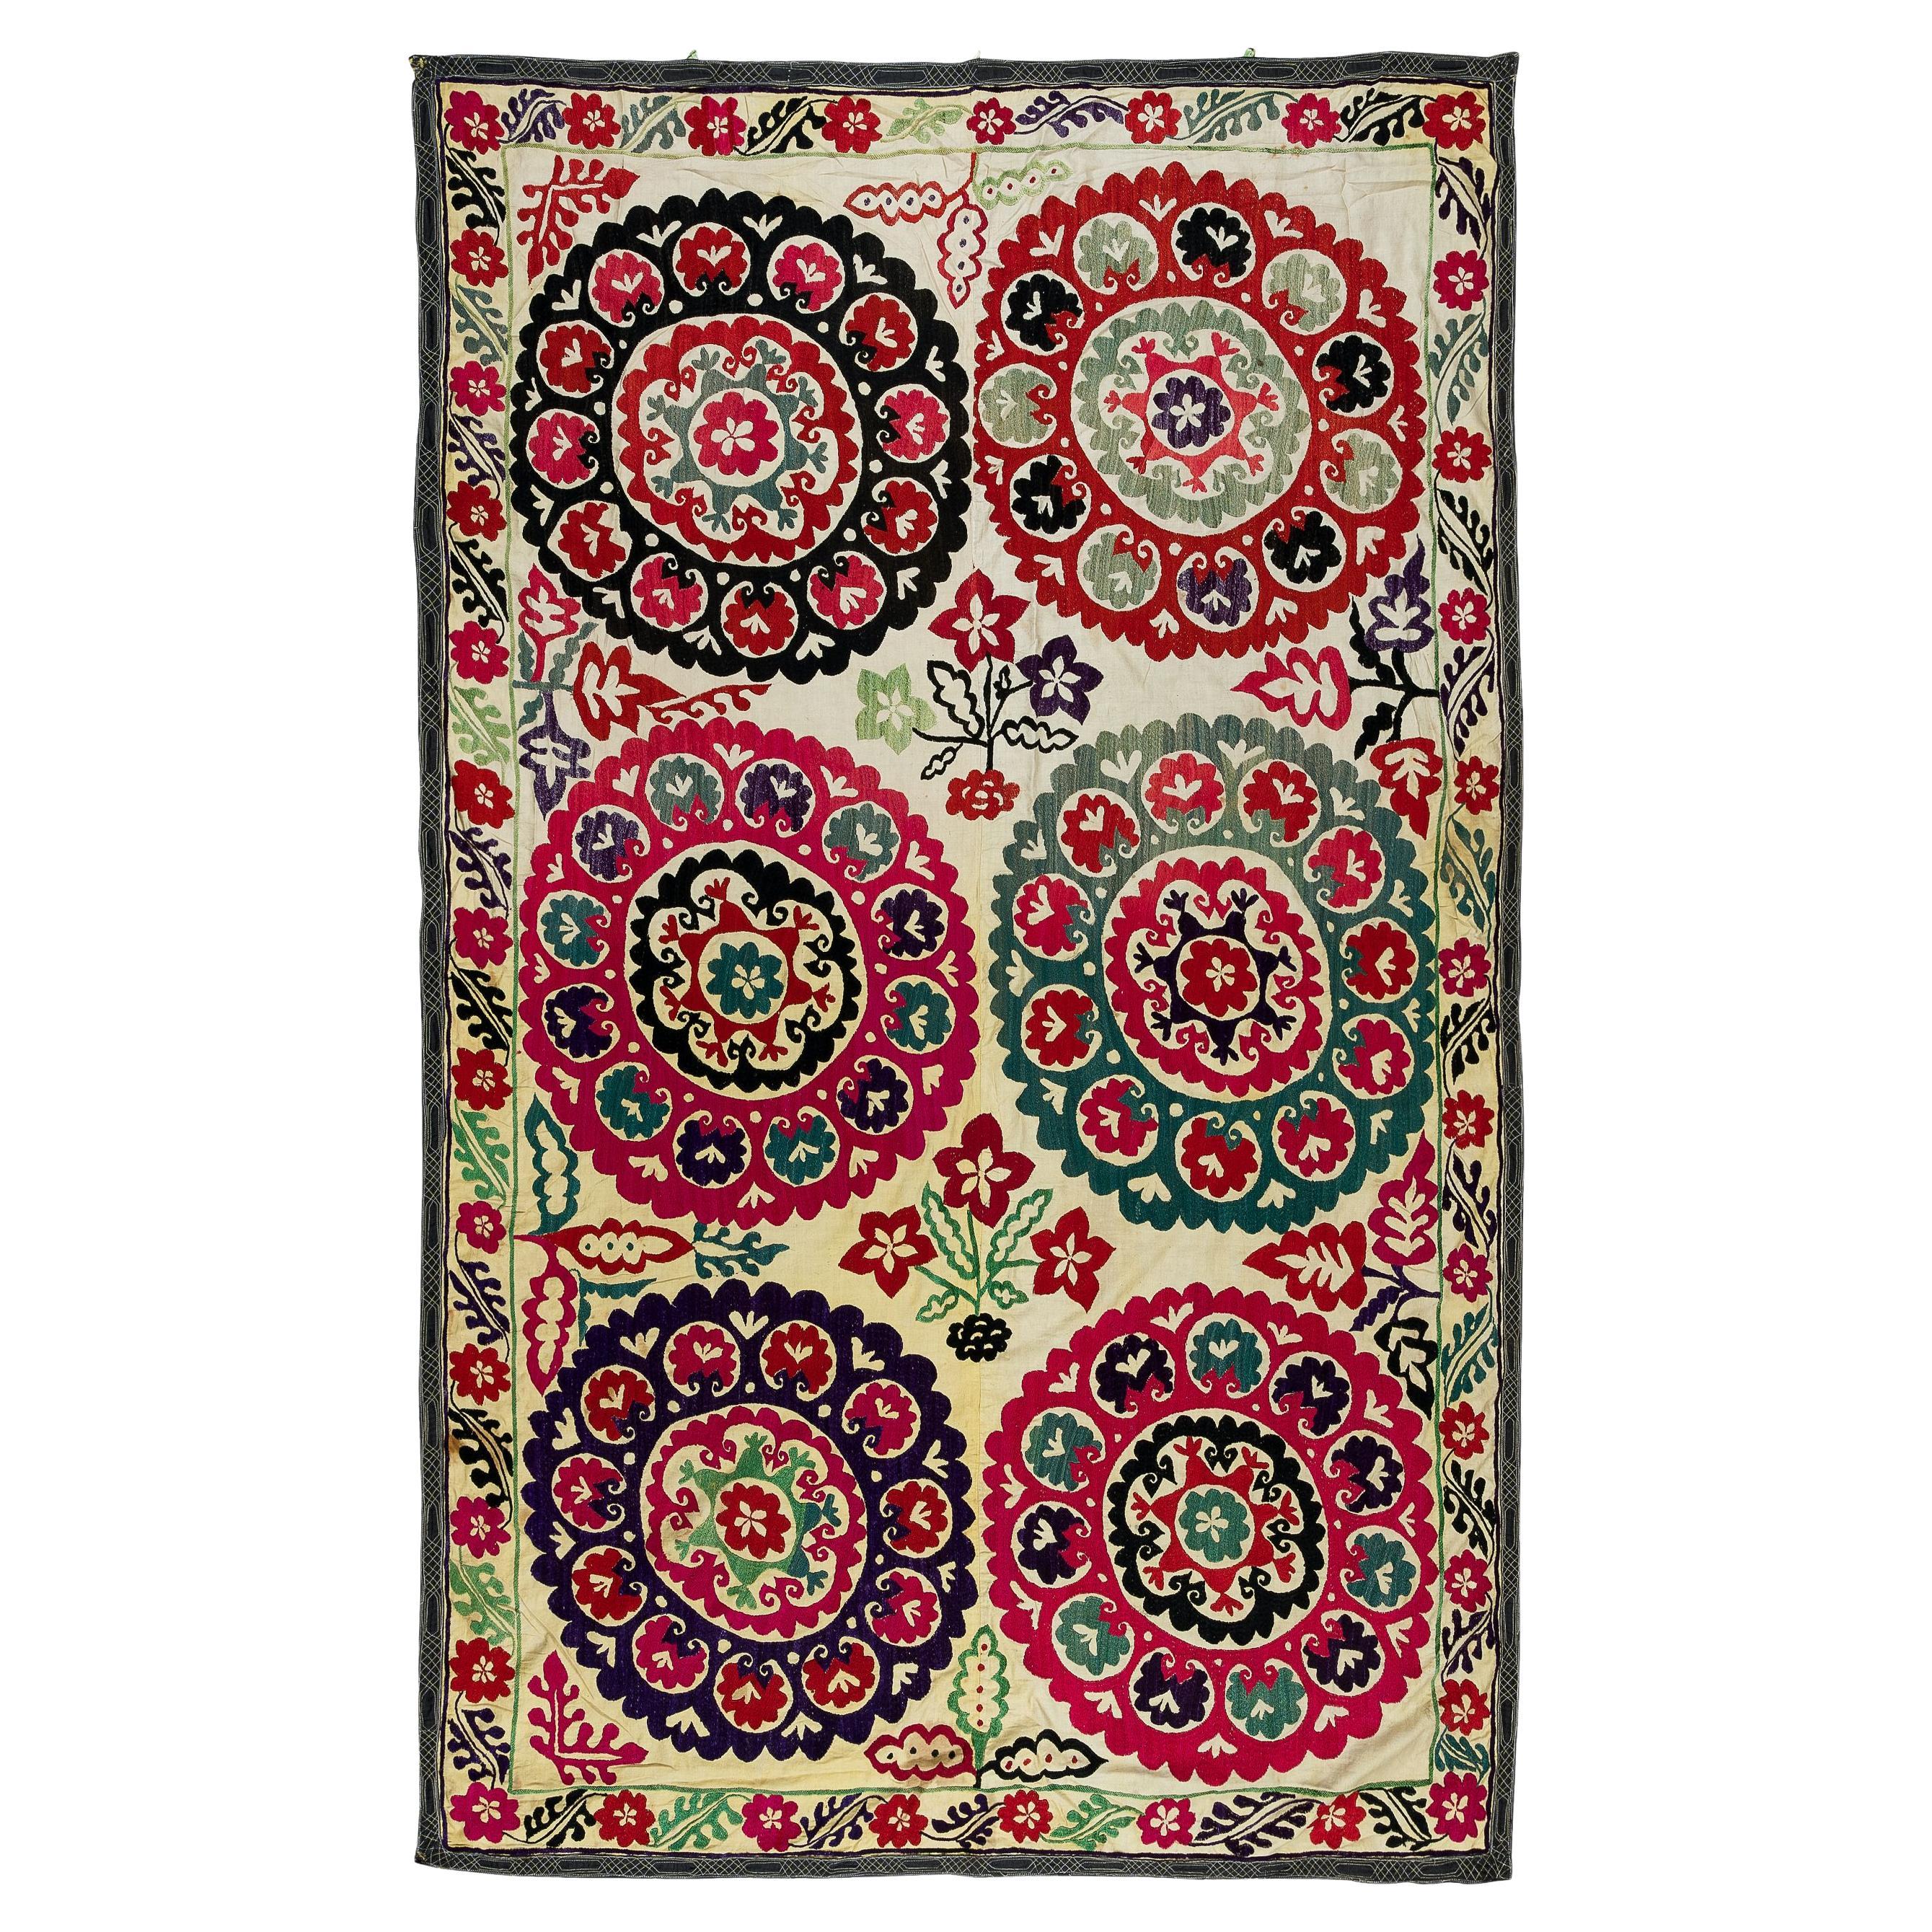 4.7x7.4 Ft Silk Embroidery Wall Hanging, Suzani Tablecloth, Vintage Bedspread For Sale